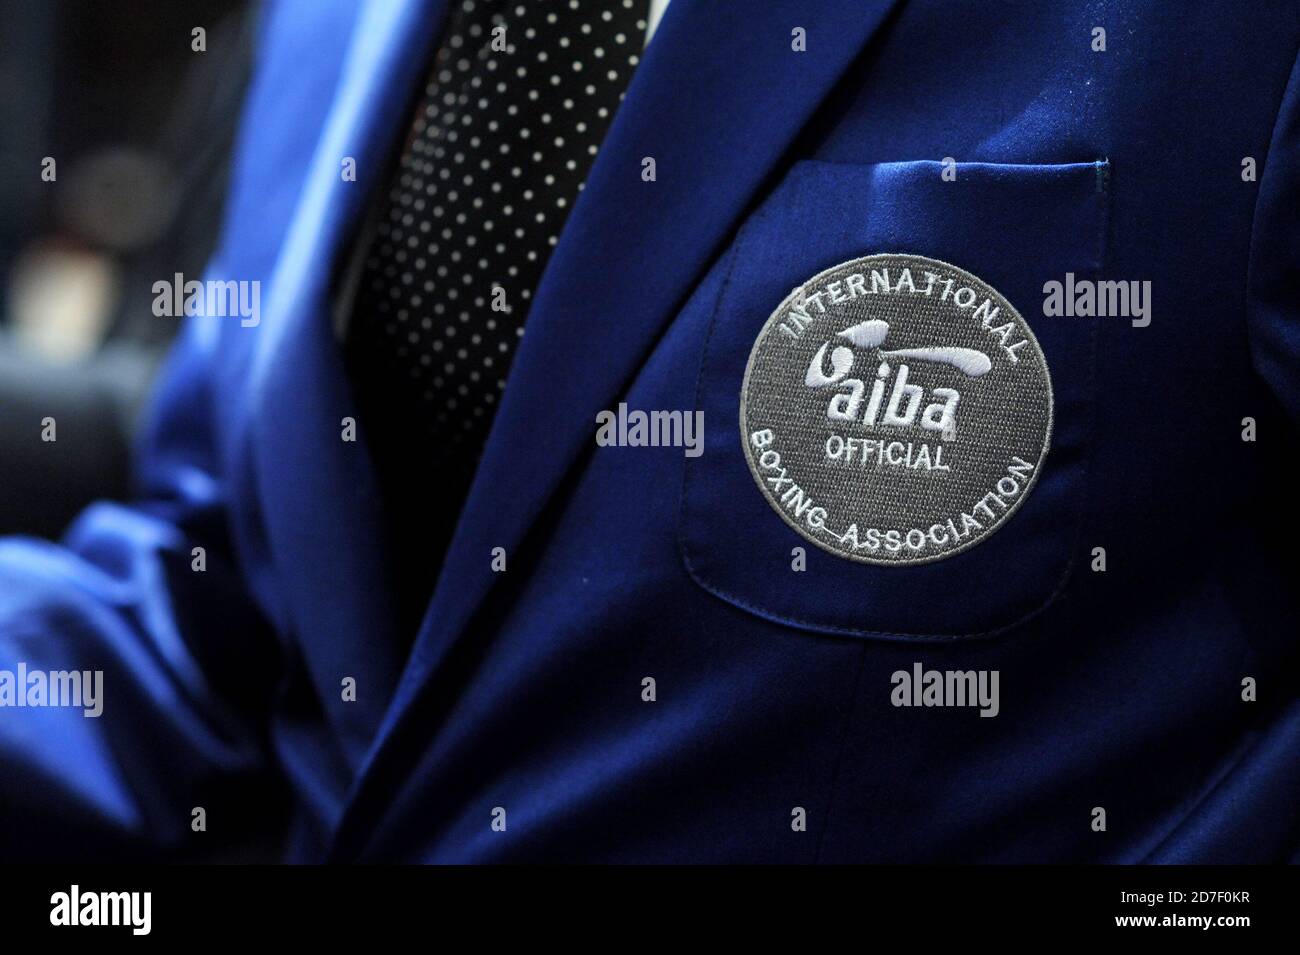 The AIBA's logo on a judge's jacket during the World Boxing Champioship in Milan 2009. Stock Photo